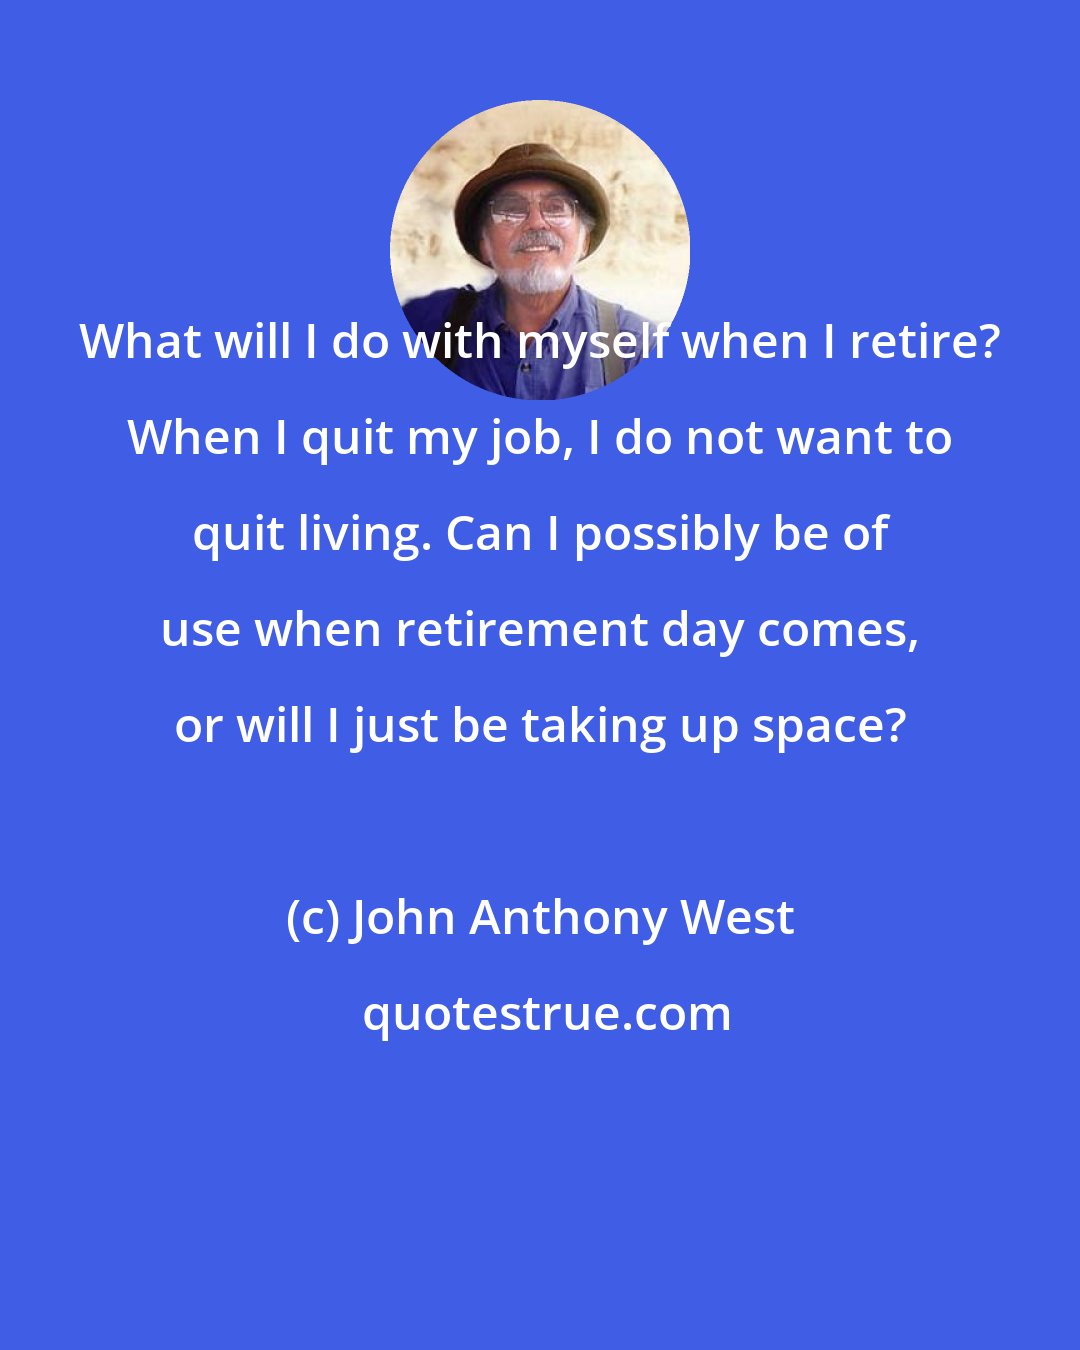 John Anthony West: What will I do with myself when I retire? When I quit my job, I do not want to quit living. Can I possibly be of use when retirement day comes, or will I just be taking up space?